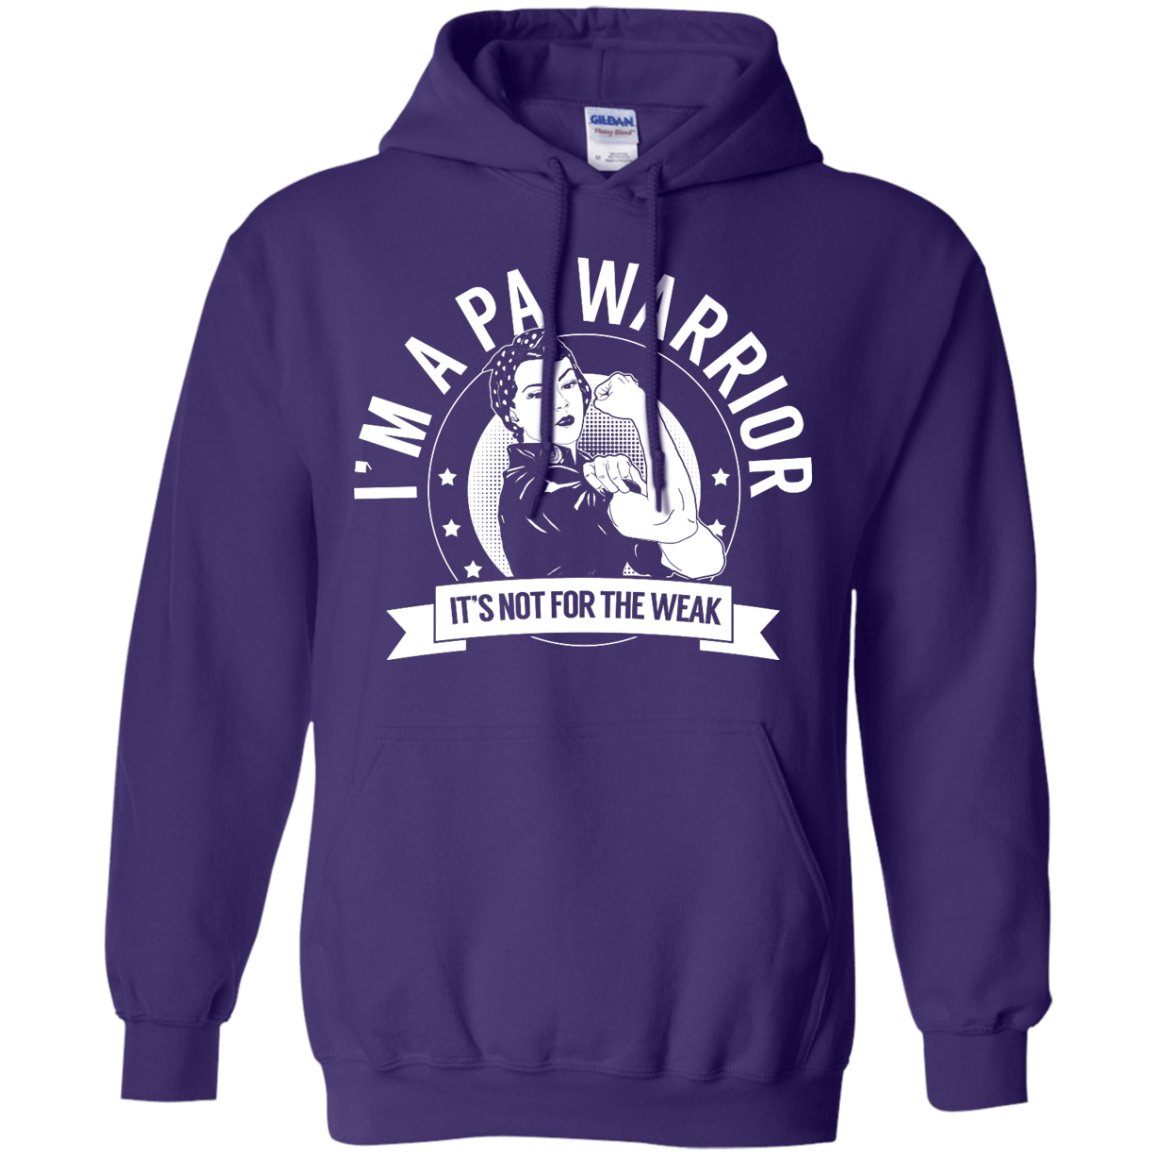 Pernicious Anaemia - PA Warrior Not For The Weak Pullover Hoodie 8 oz - The Unchargeables